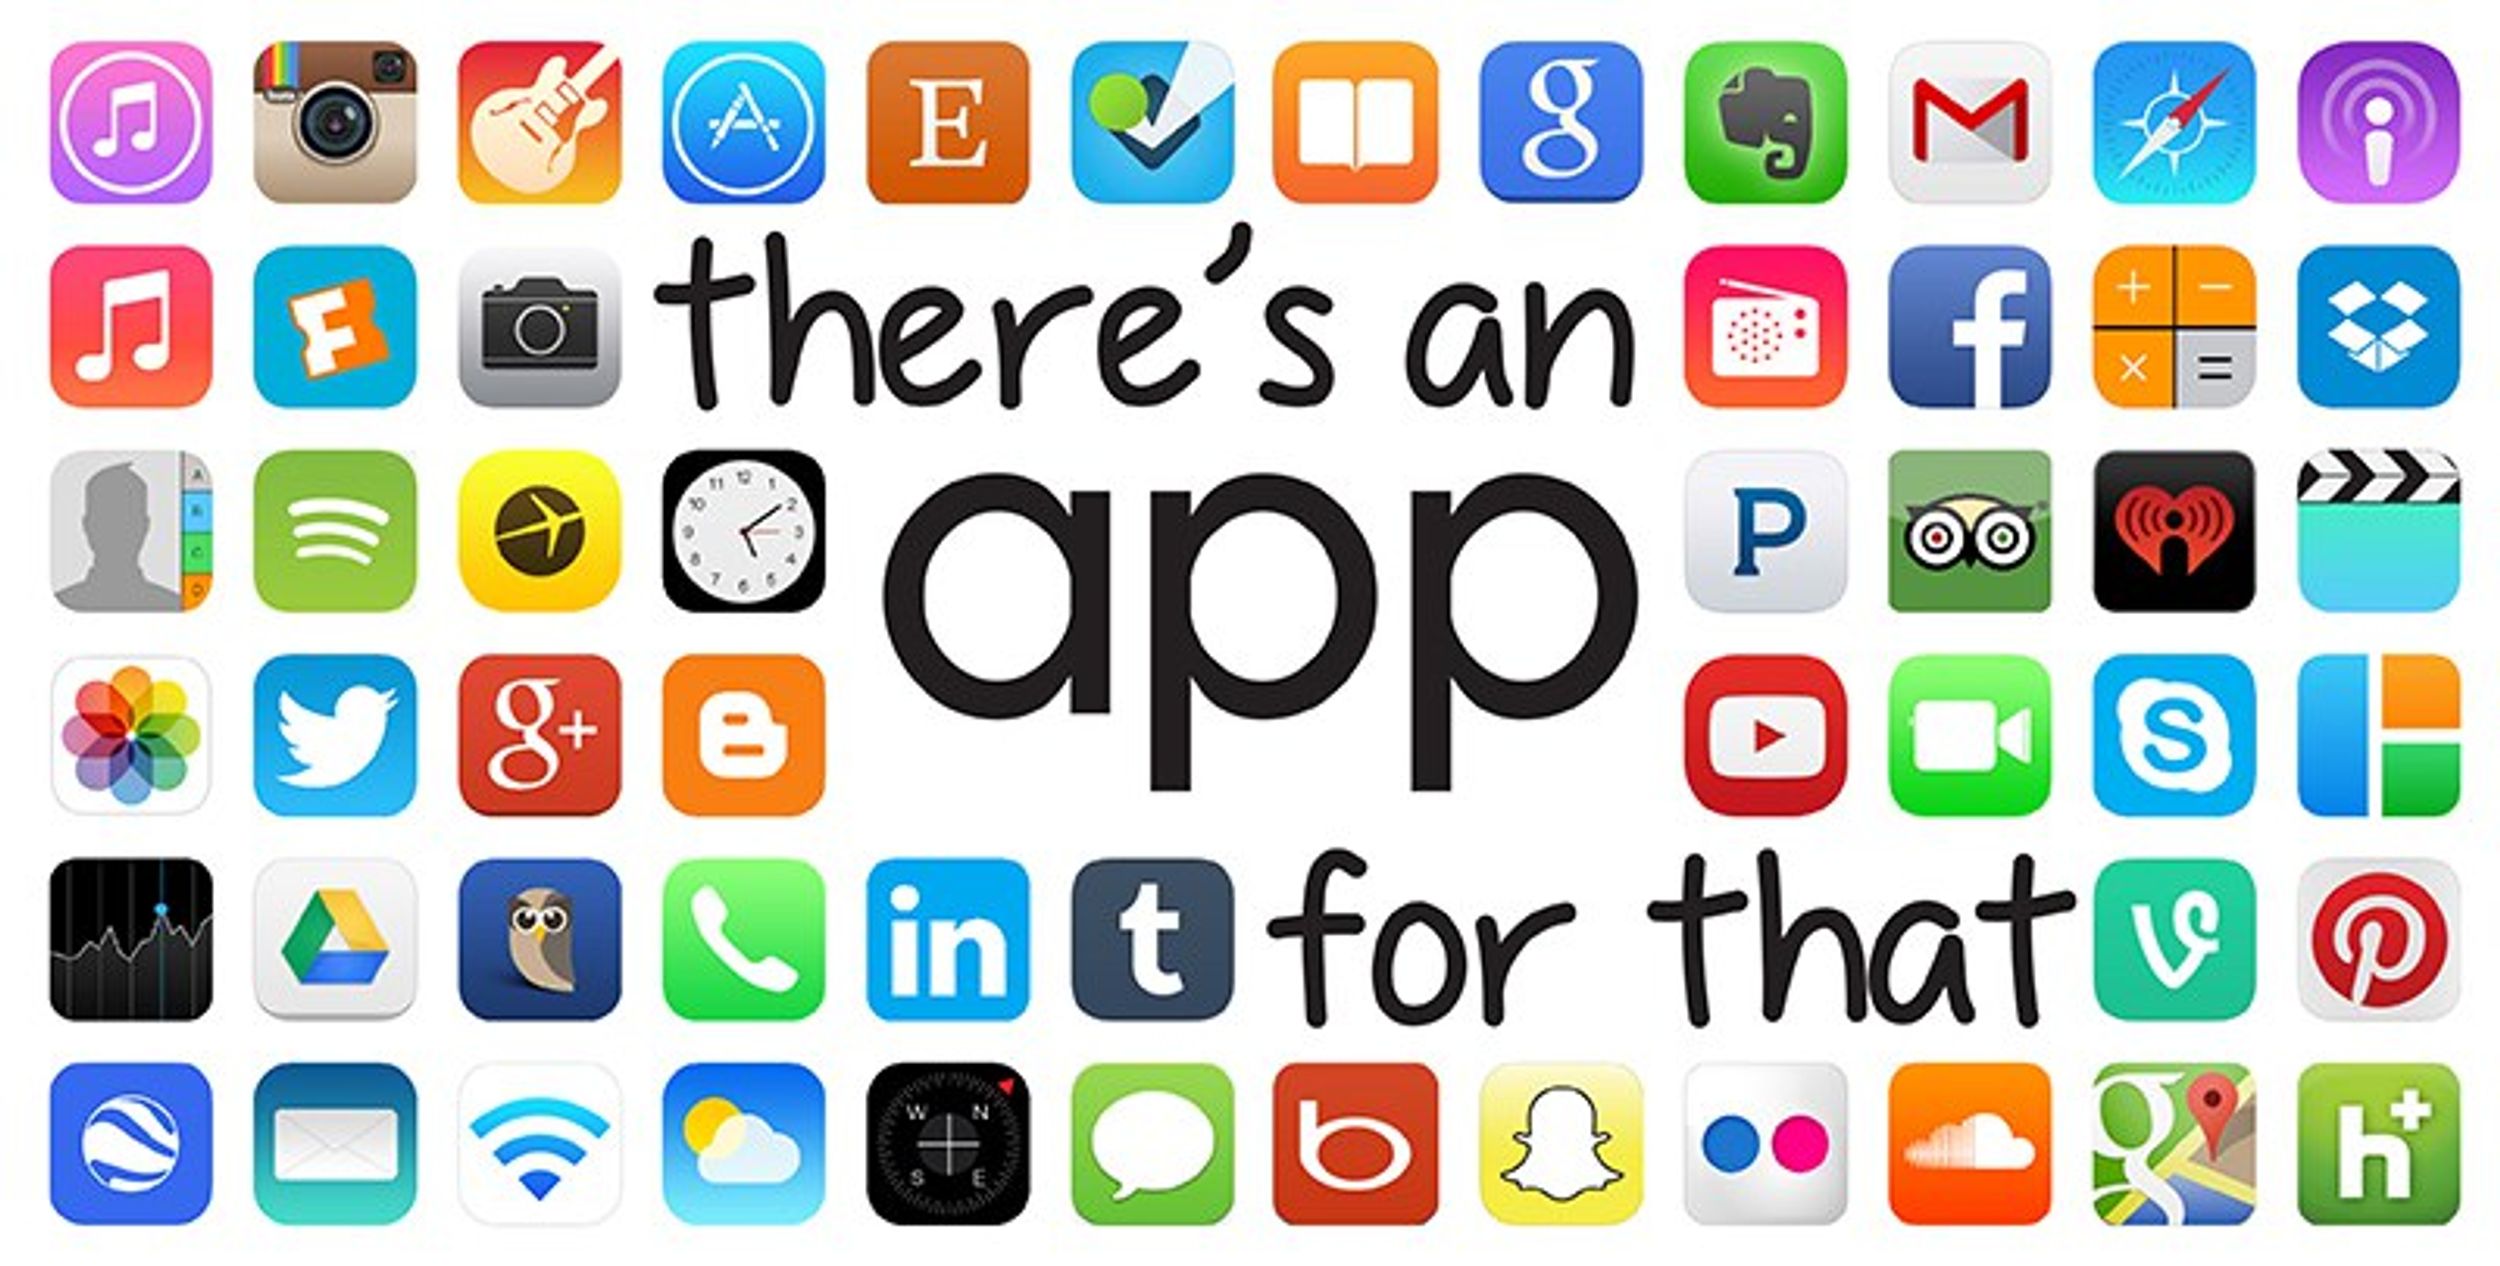 Apps To Make 2016 Your Best Year Yet